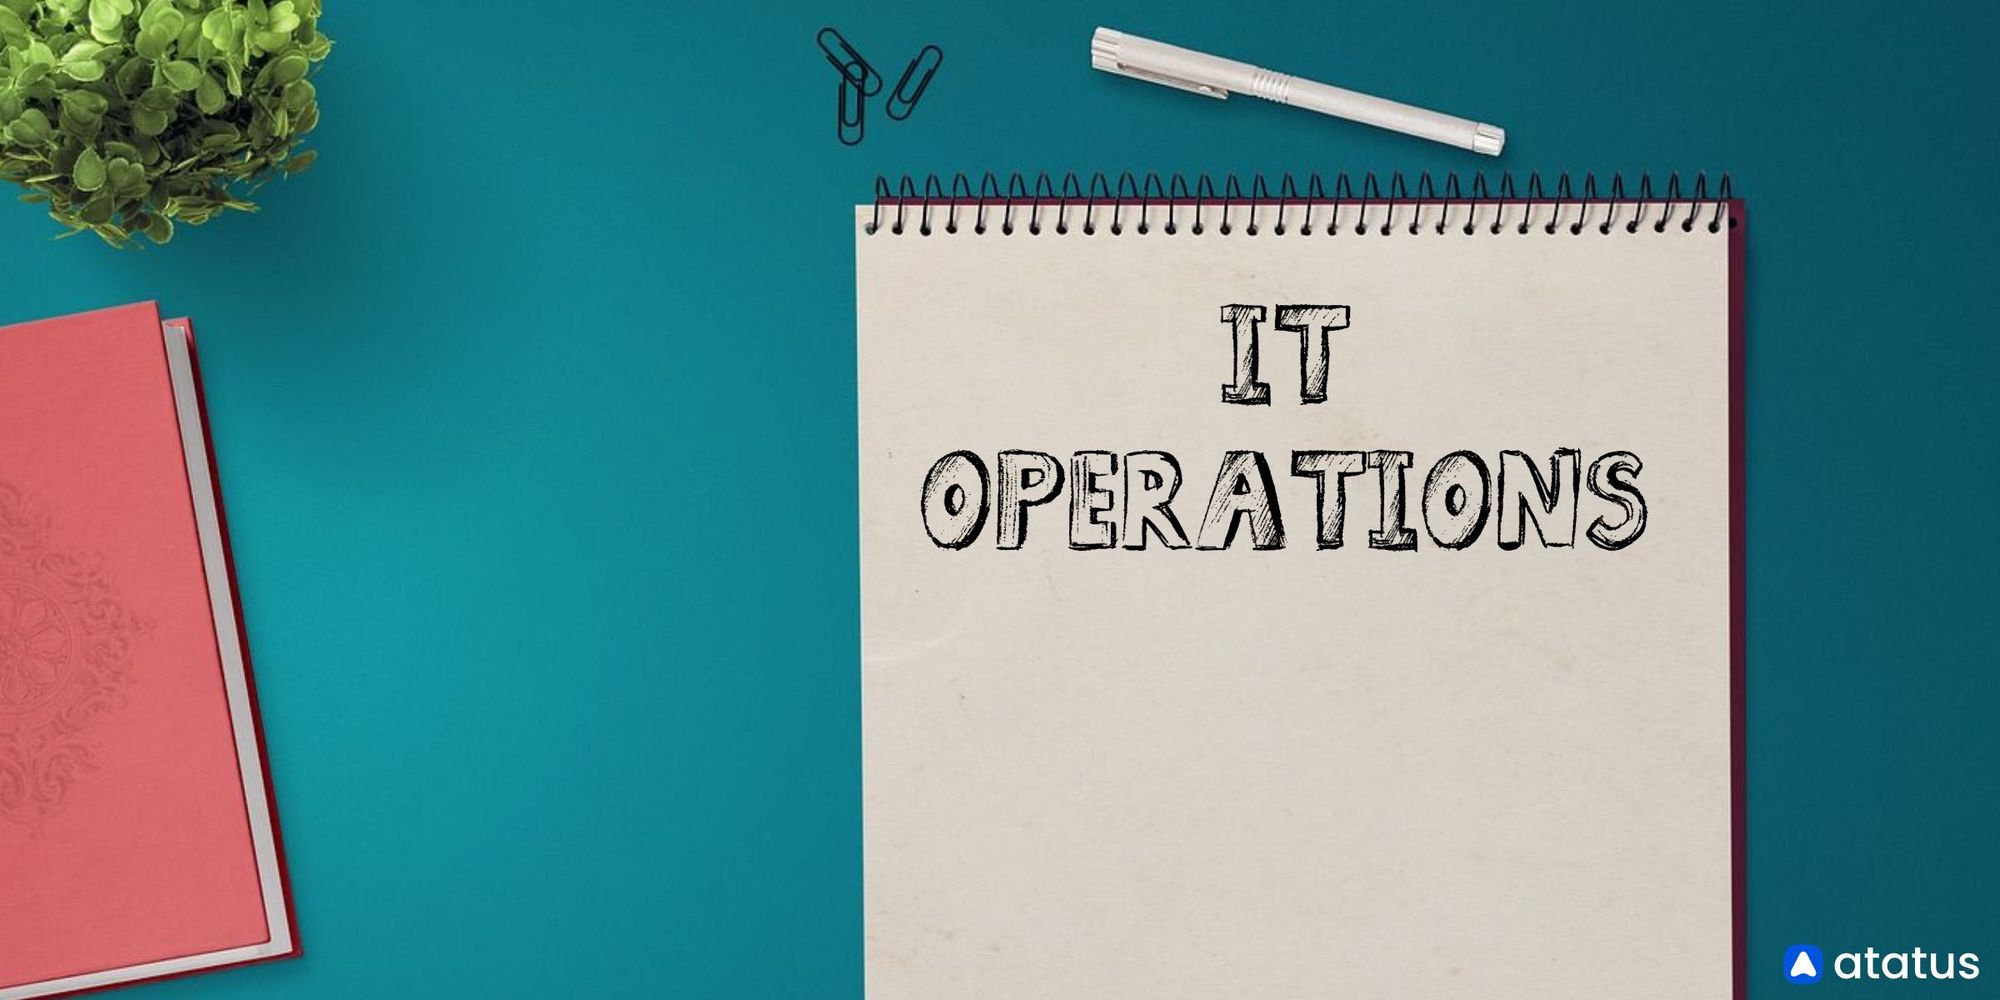 IT Operations (ITOps): Definition, Process, Tasks and More